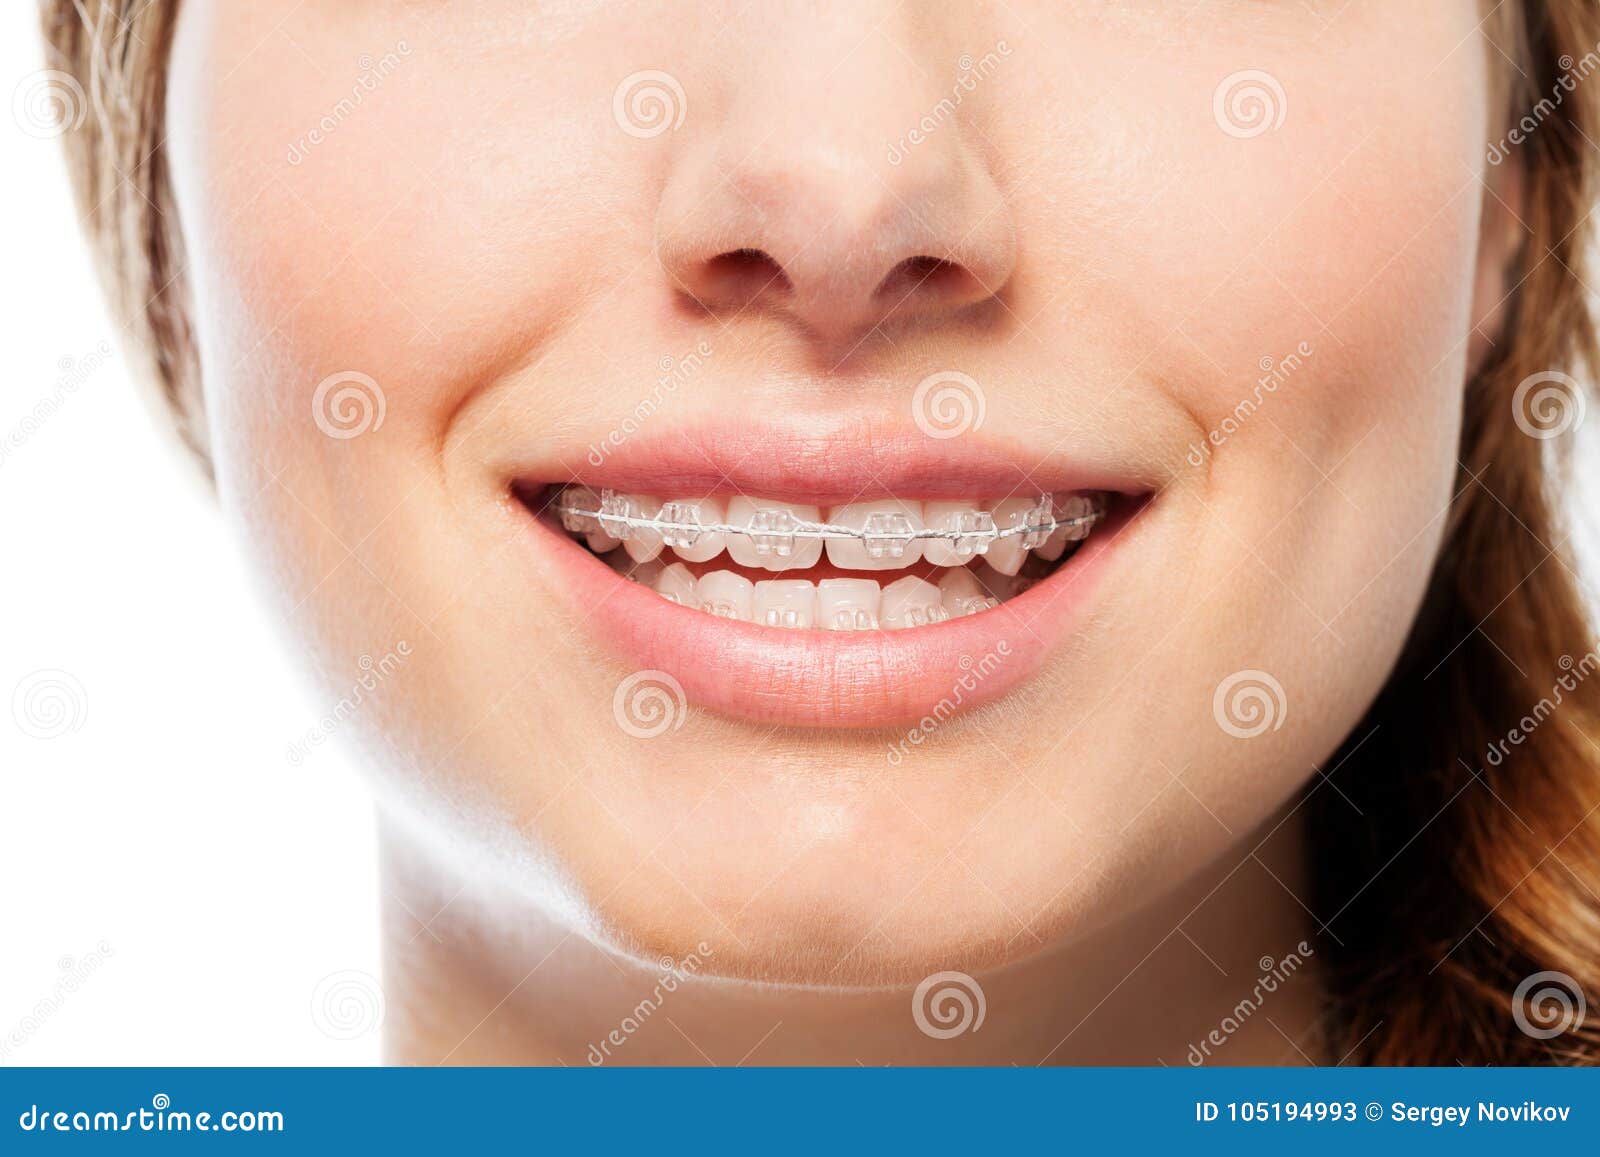 happy woman`s smile with orthodontic clear braces